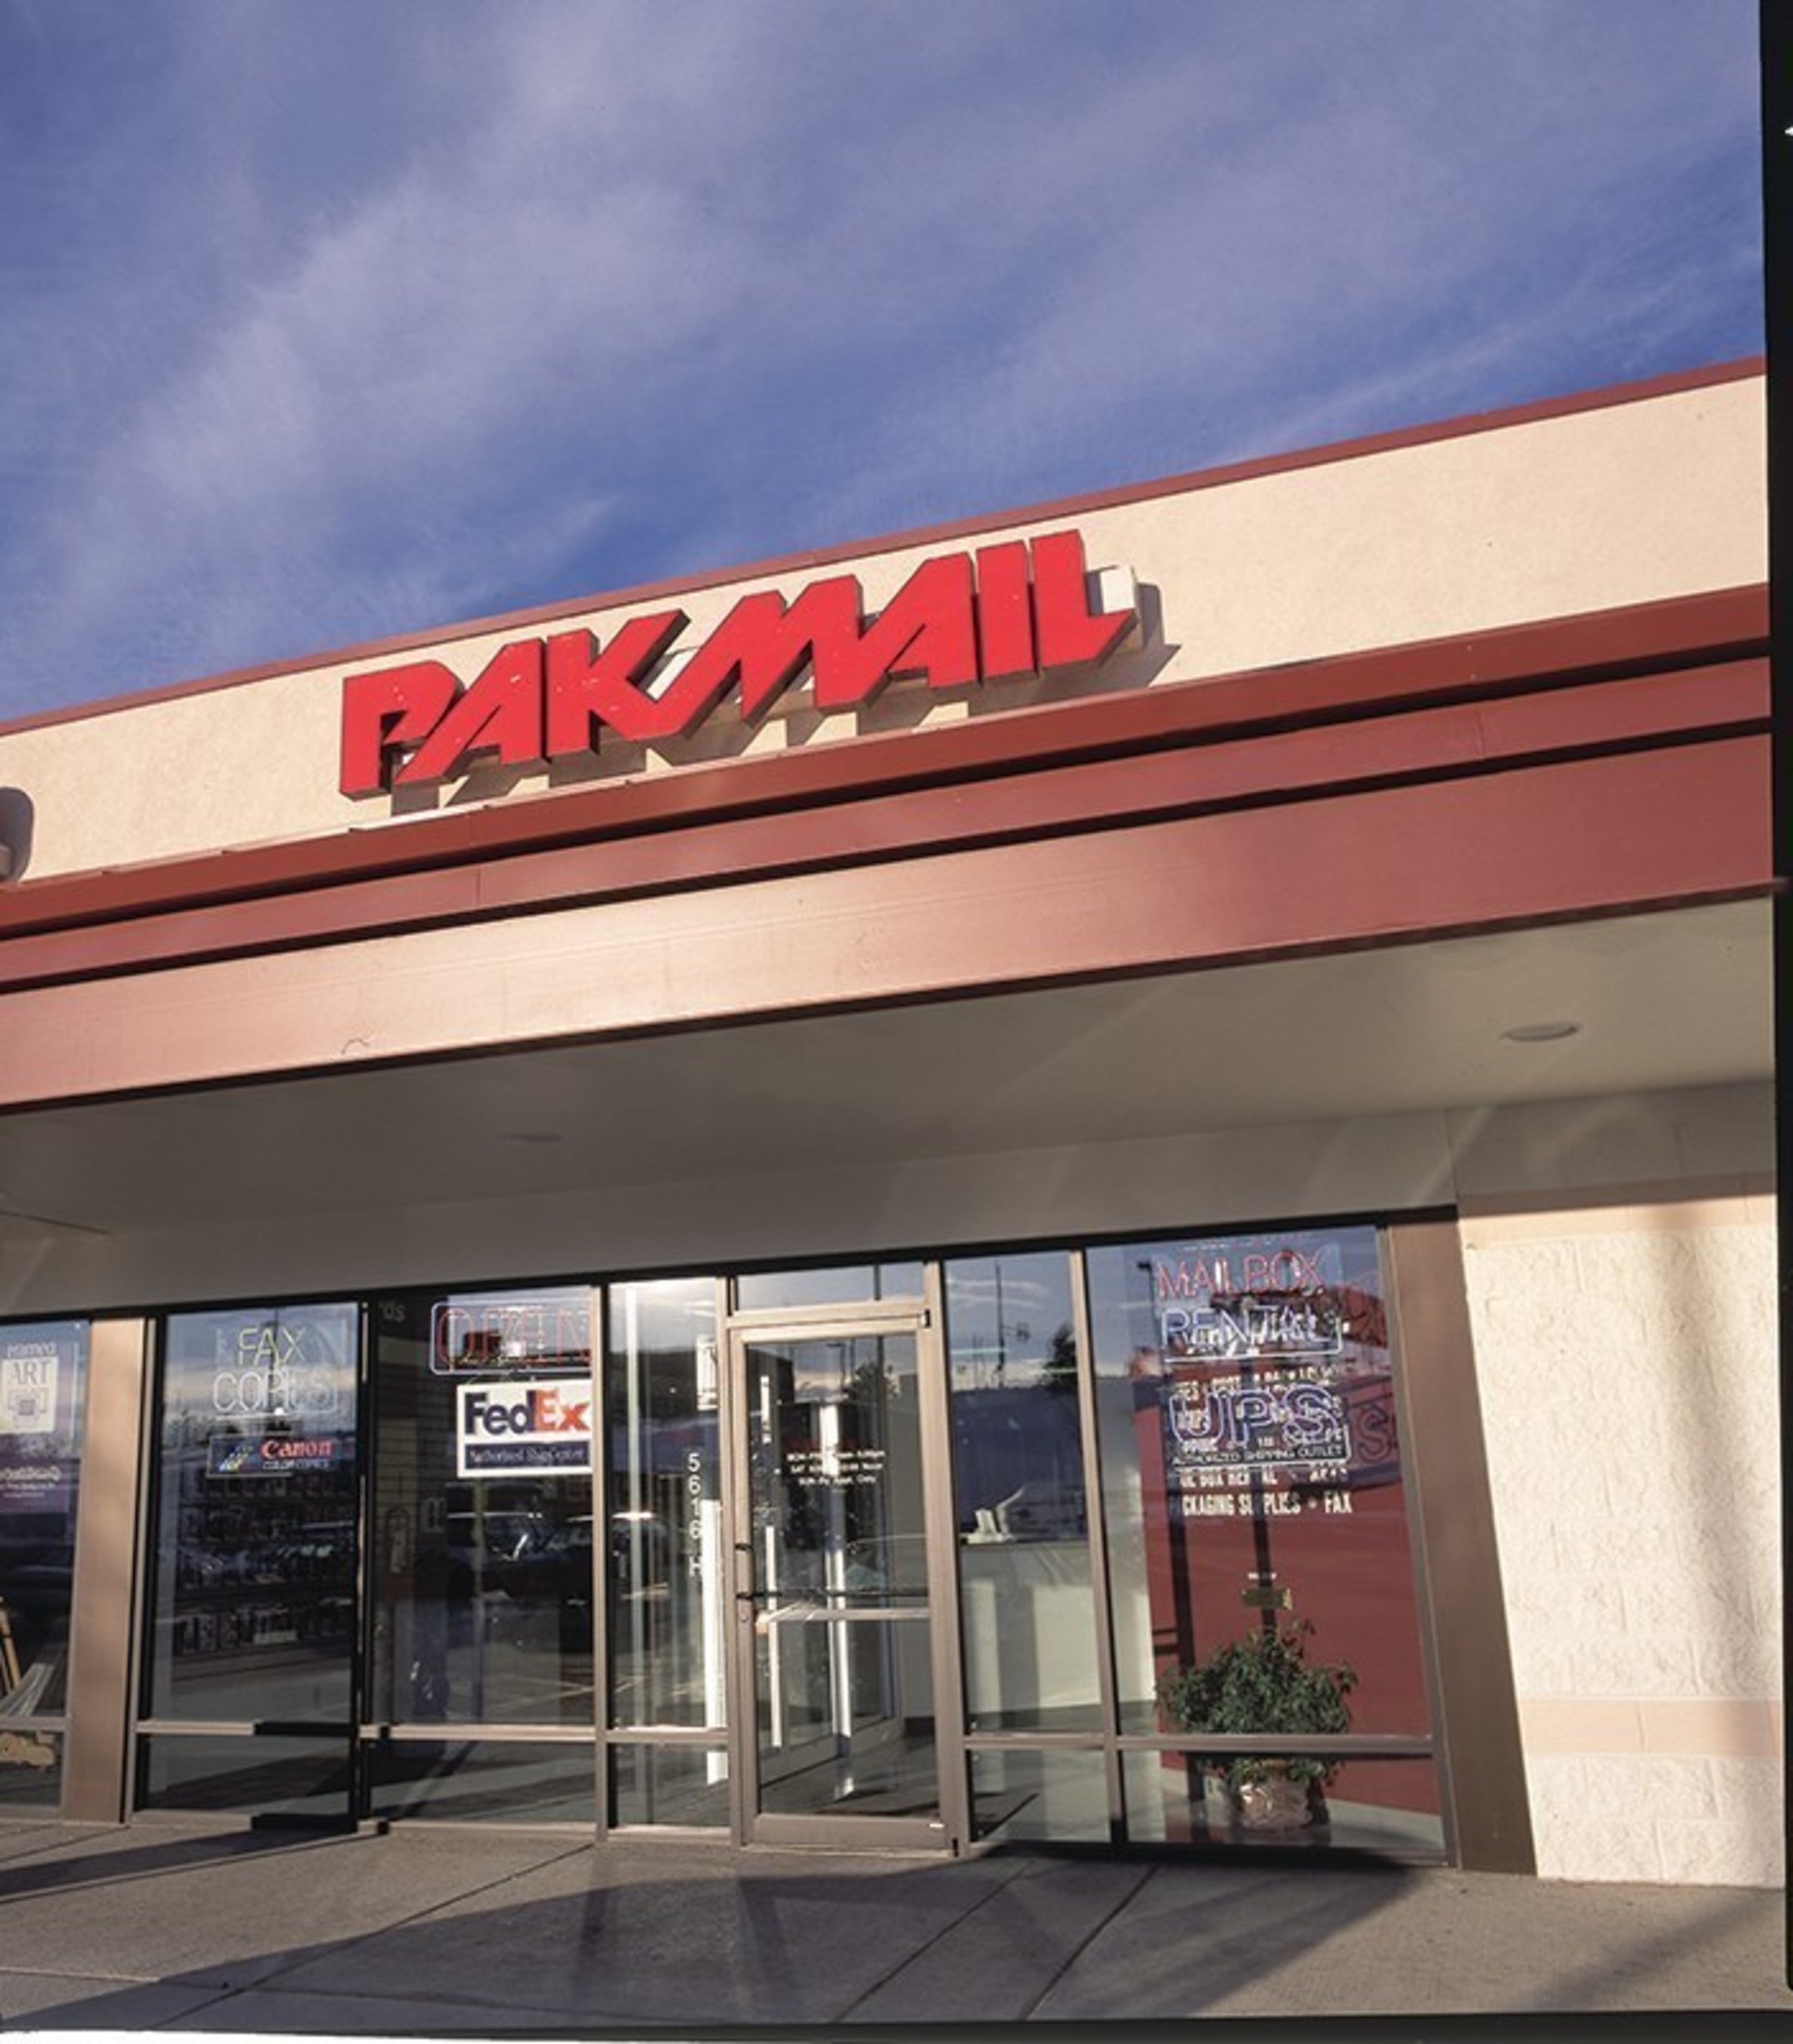 Pak Mail acquired by Annex Brands, Inc.